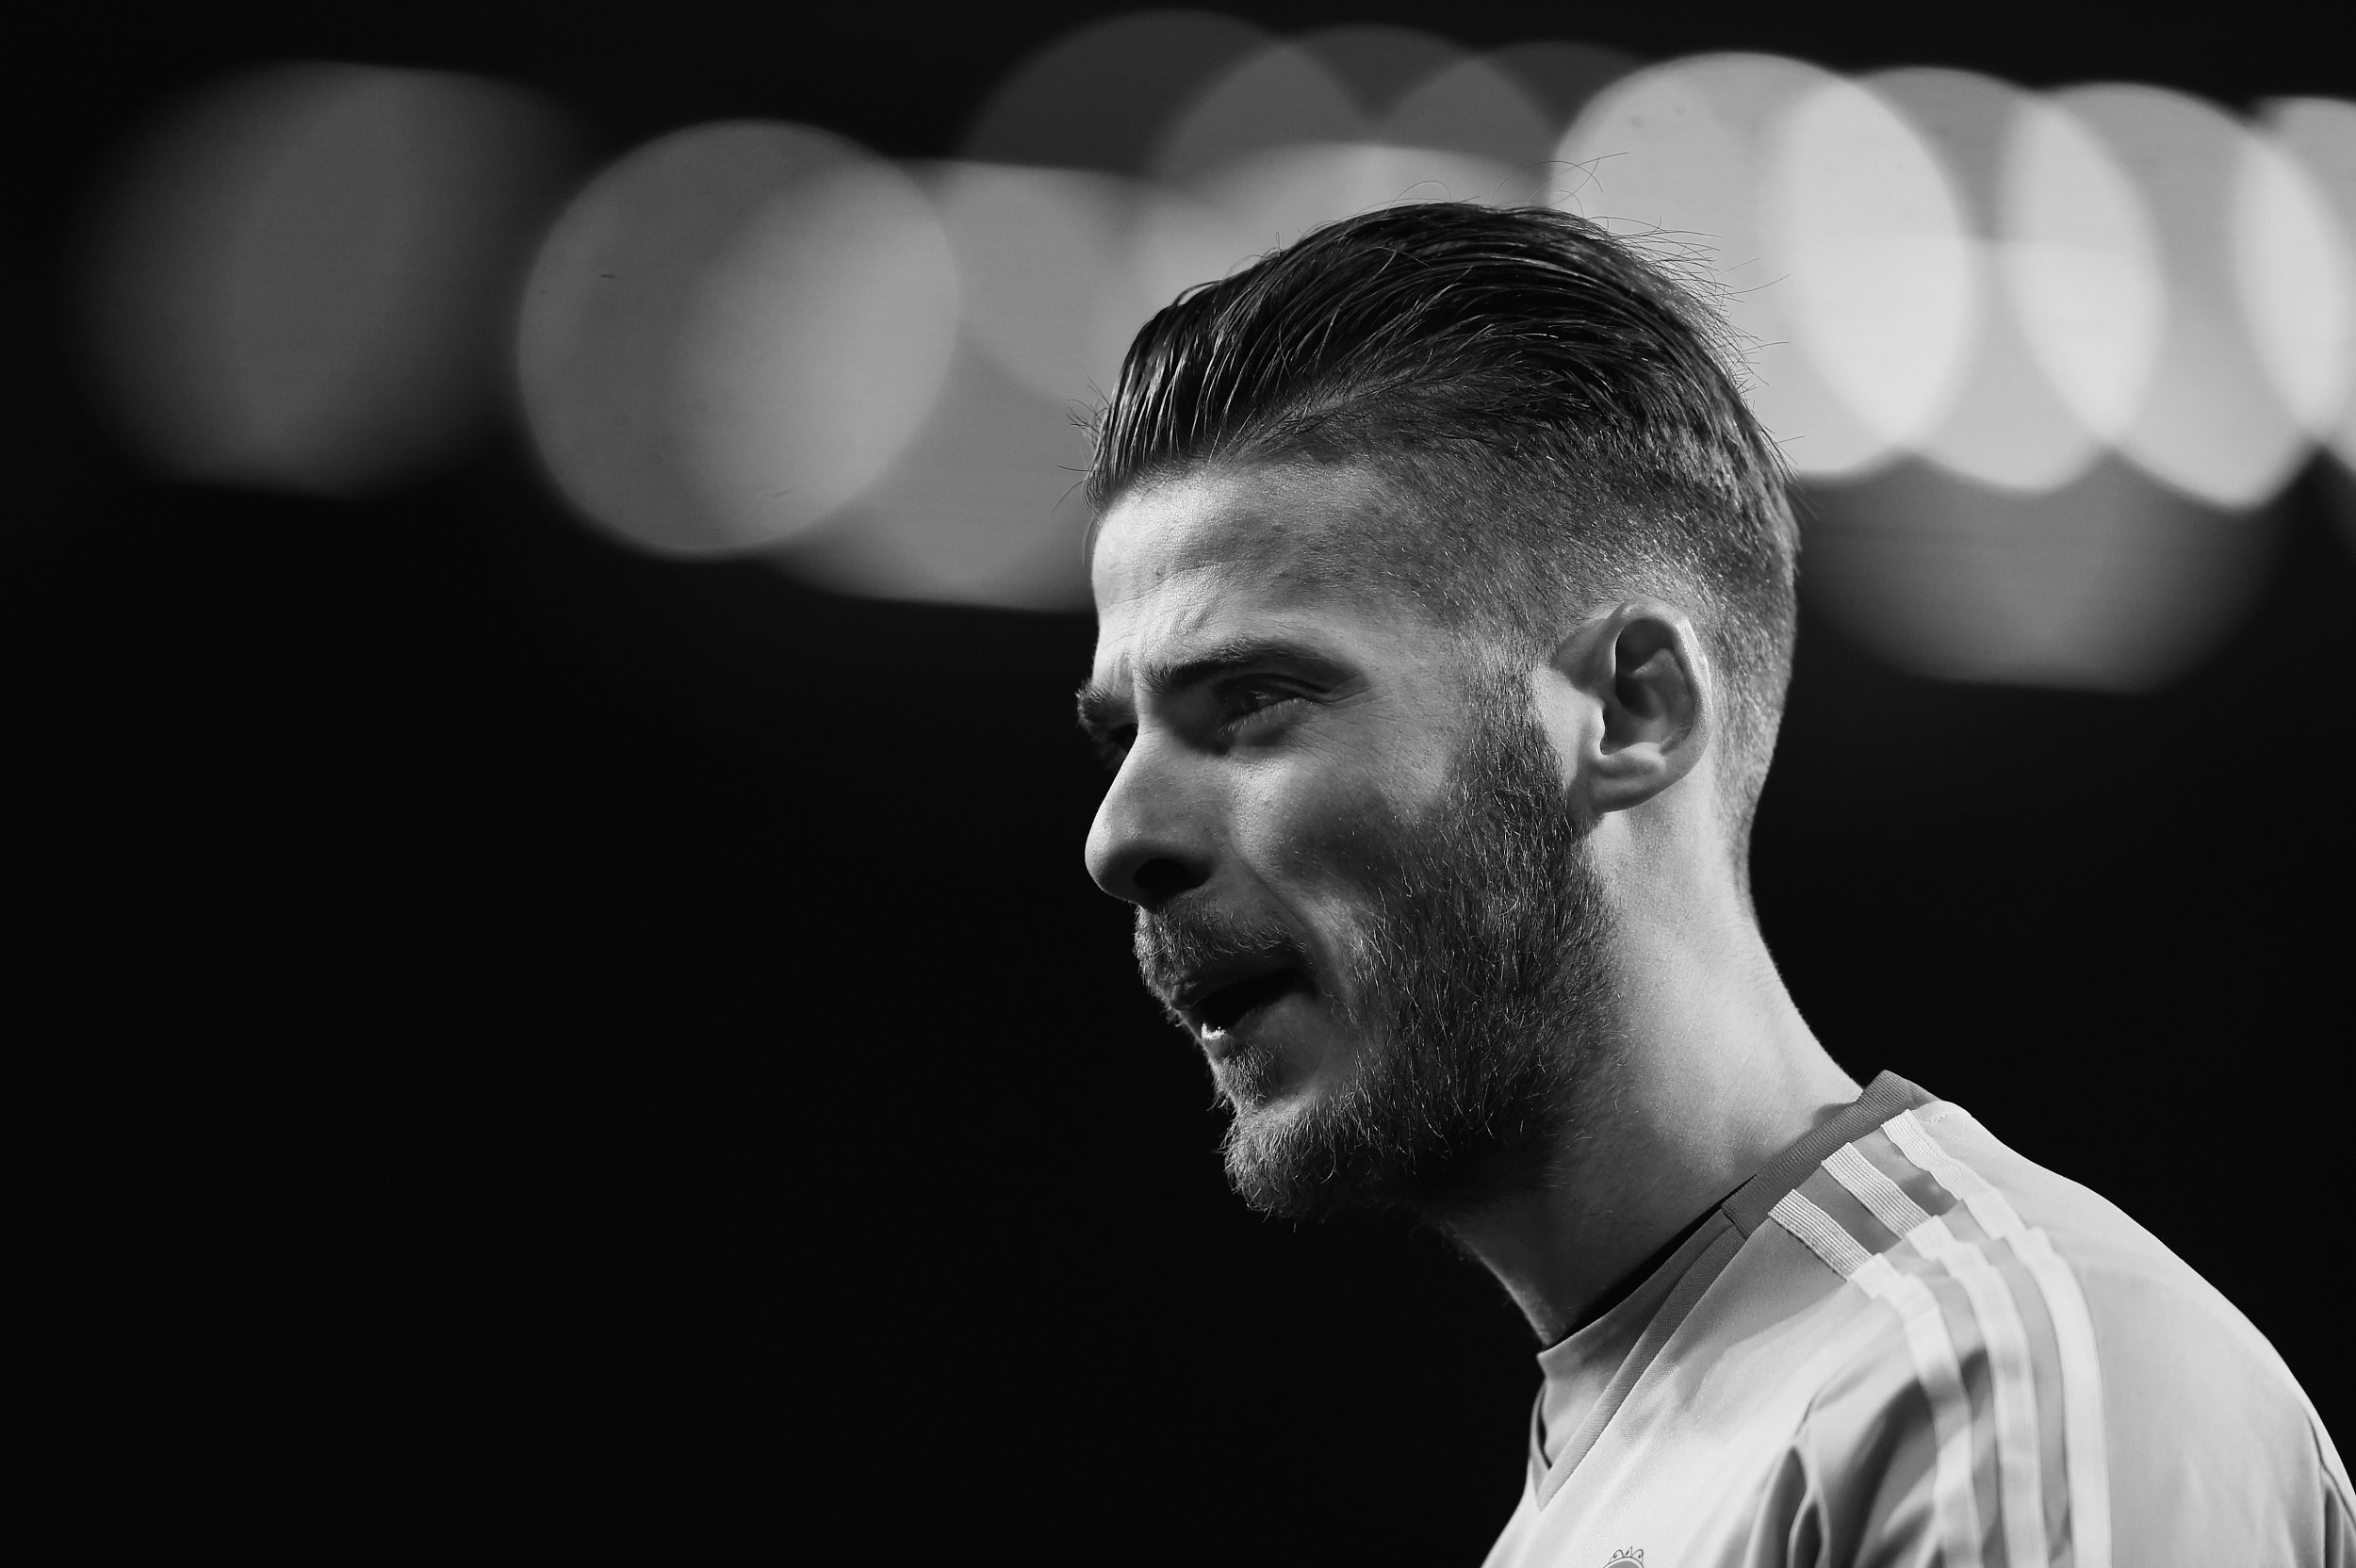 Manchester United goalkeeper David De Gea has been linked with Real Madrid and Paris Saint-Germain.